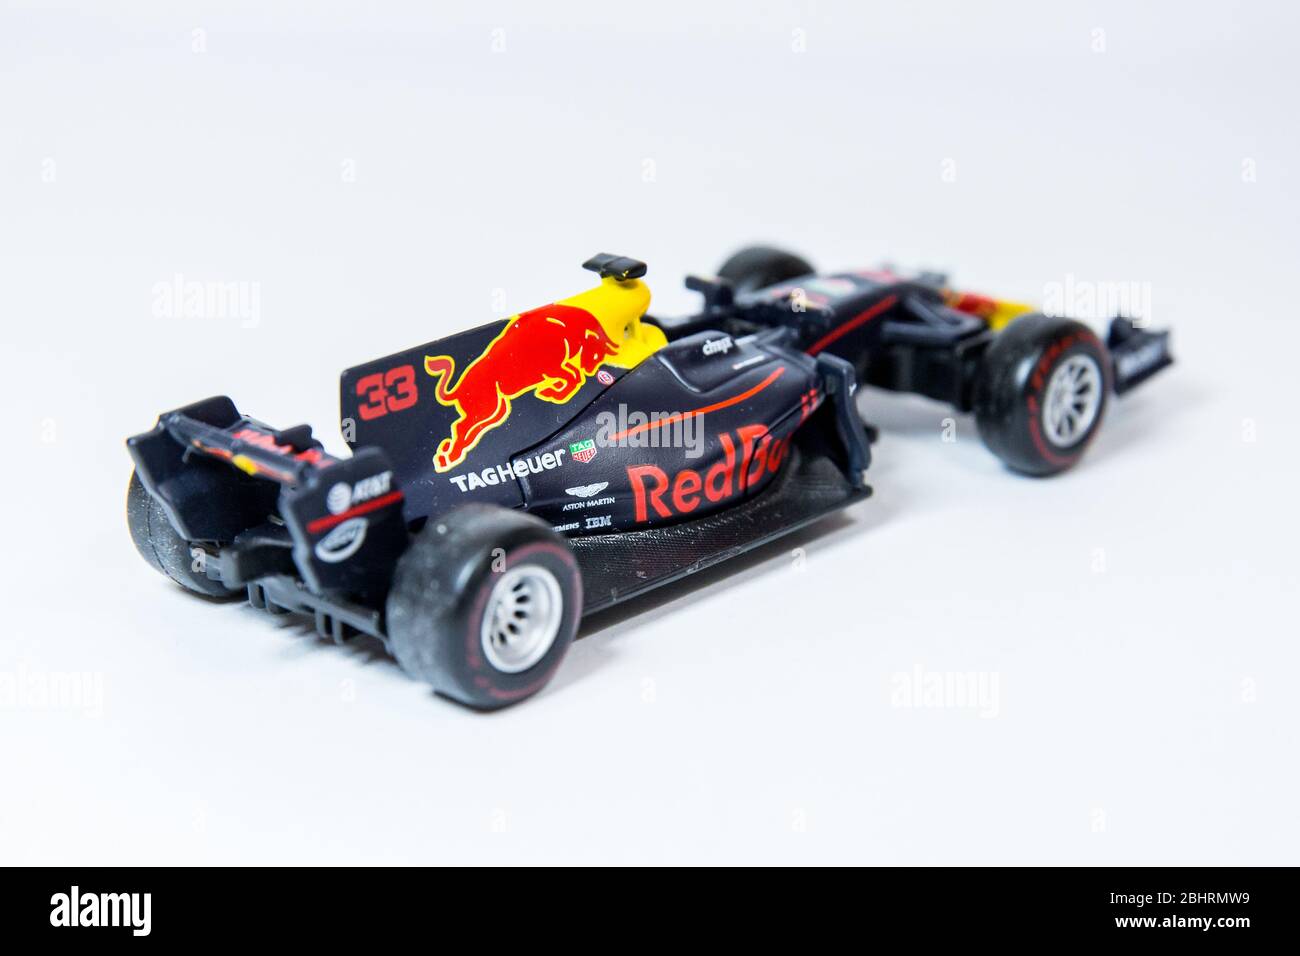 Bburago Red Bull Racing RB13 1:43 model Formula One car. Max Verstappen's  car, complete with racing driver figure Stock Photo - Alamy